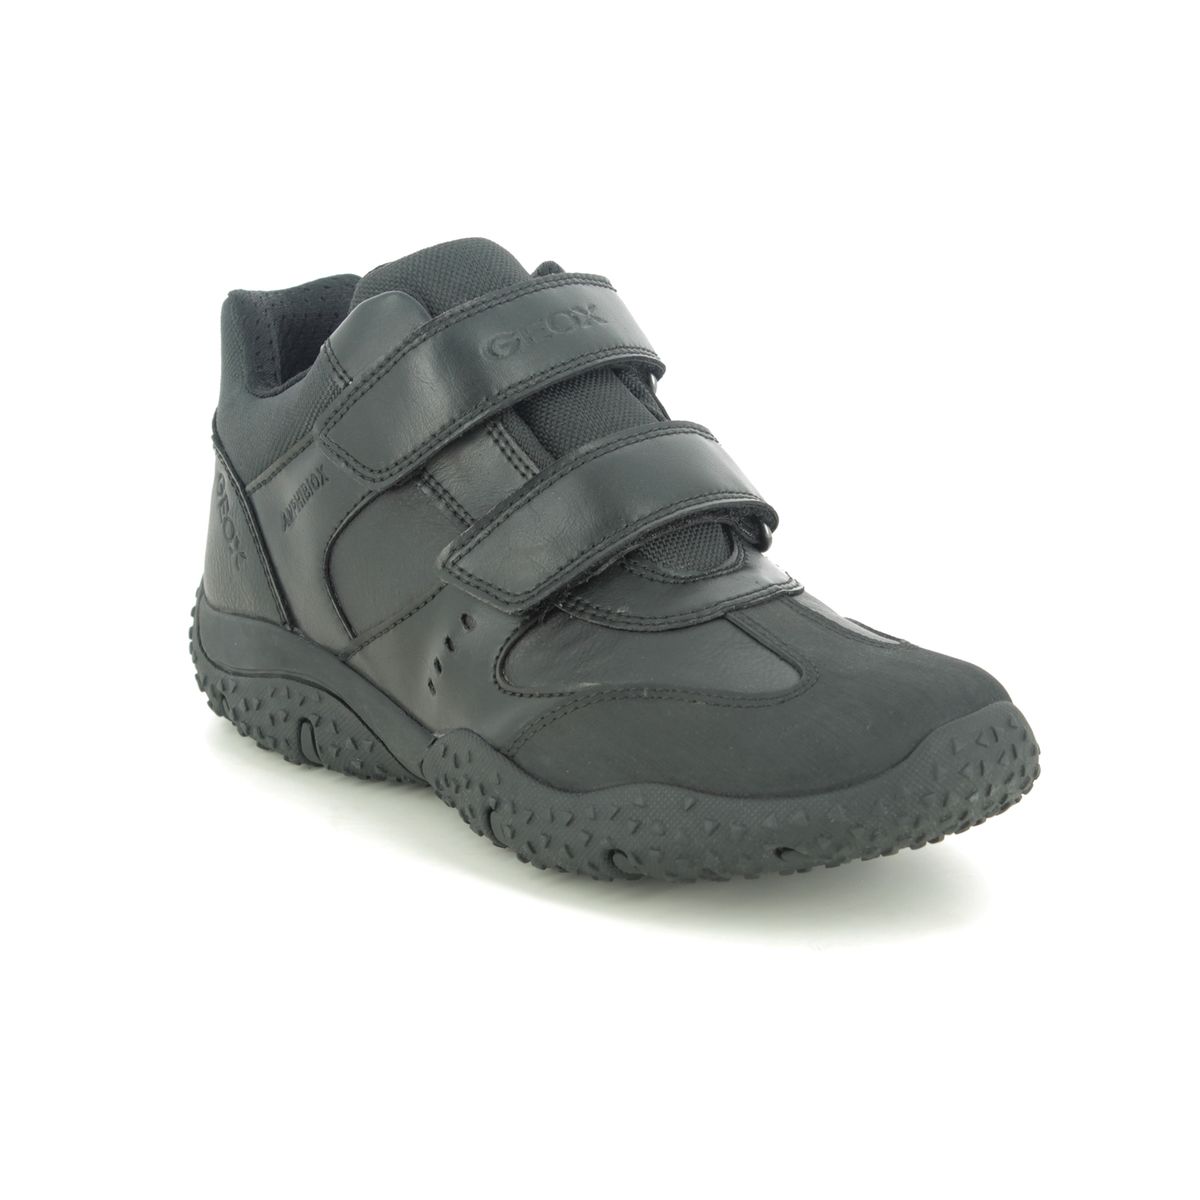 Geox - Baltic Boy Tex (Black Leather) J0442A-C9999 In Size 38 In Plain Black Leather For School For kids